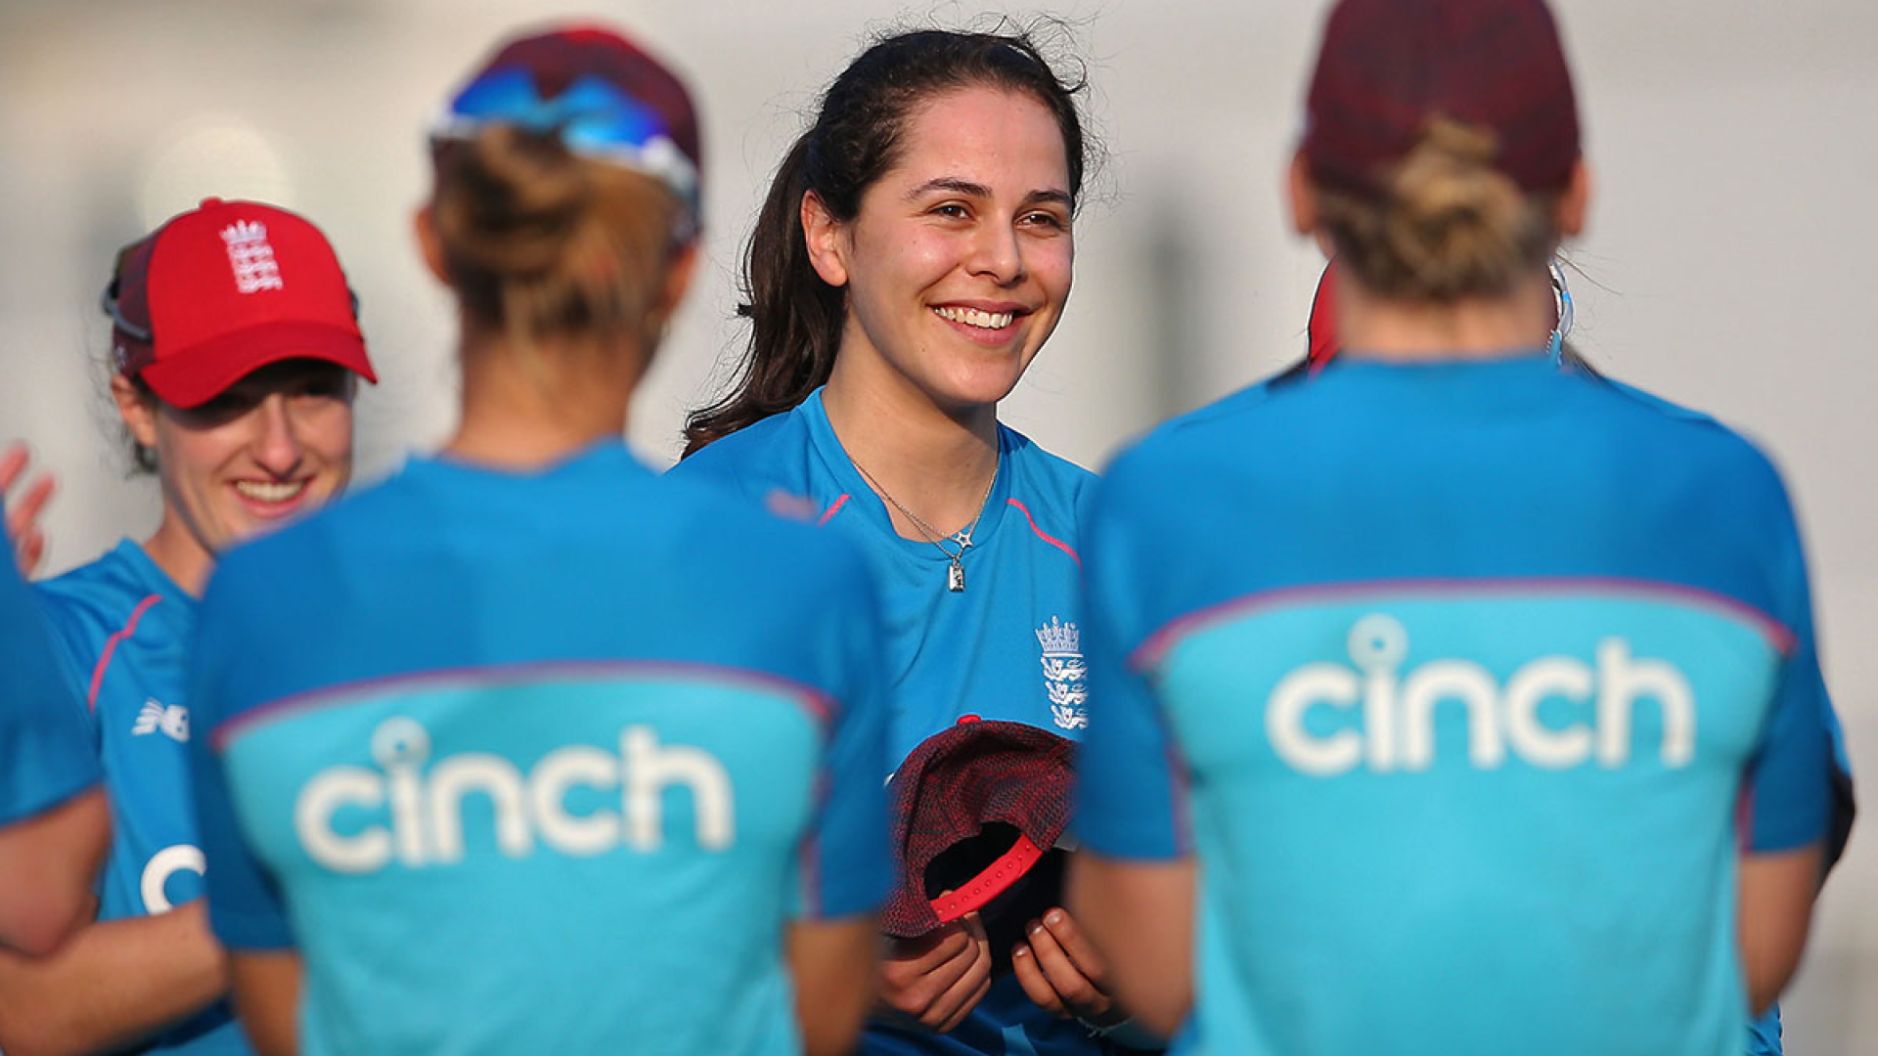 Women’s Ashes | England name 17 member squad, Maia Bouchier receives maiden Test call up